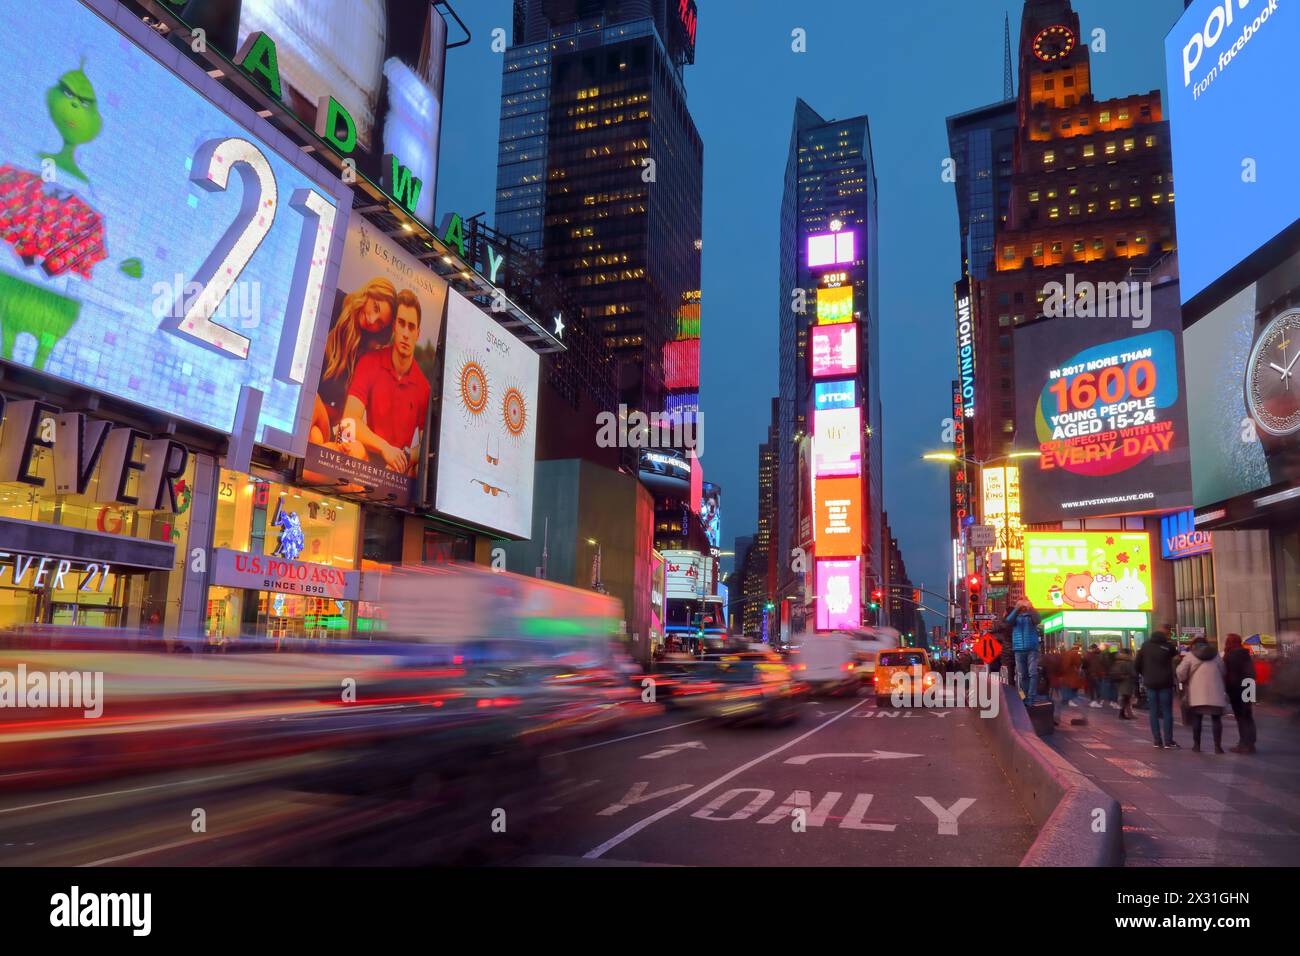 Geografie / Reise, USA, New York, New York City, Times Square at Night, Midtown, ADDITIONAL-RIGHTS-CLEARANCE-INFO-NOT-AVAILABLE Stockfoto